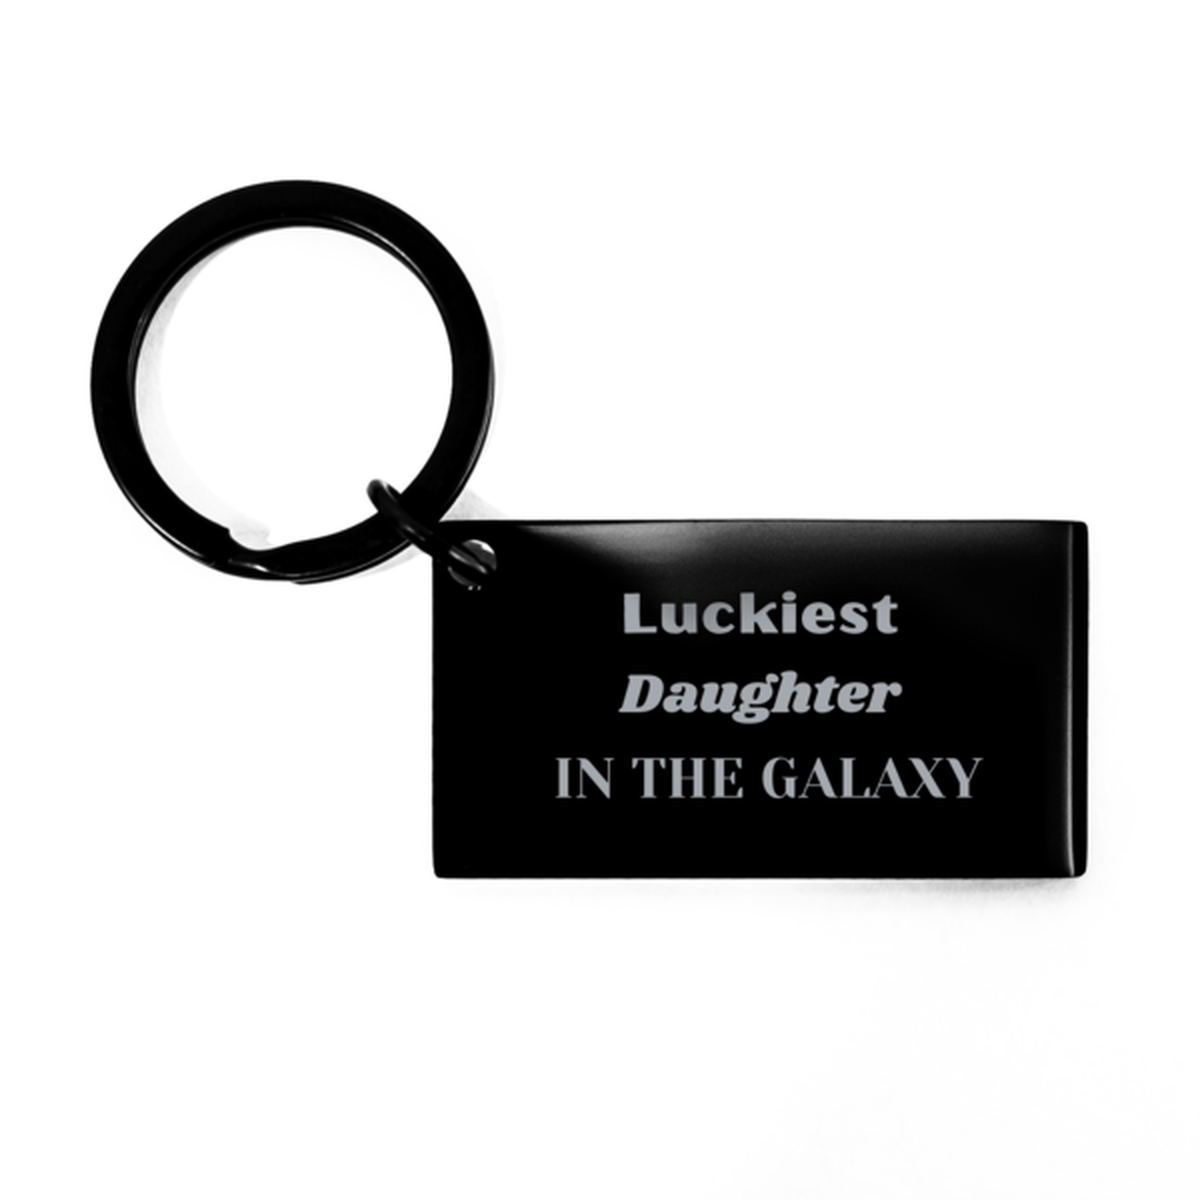 Luckiest Daughter in the Galaxy, To My Daughter Engraved Gifts, Christmas Daughter Keychain Gifts, X-mas Birthday Unique Gifts For Daughter Men Women